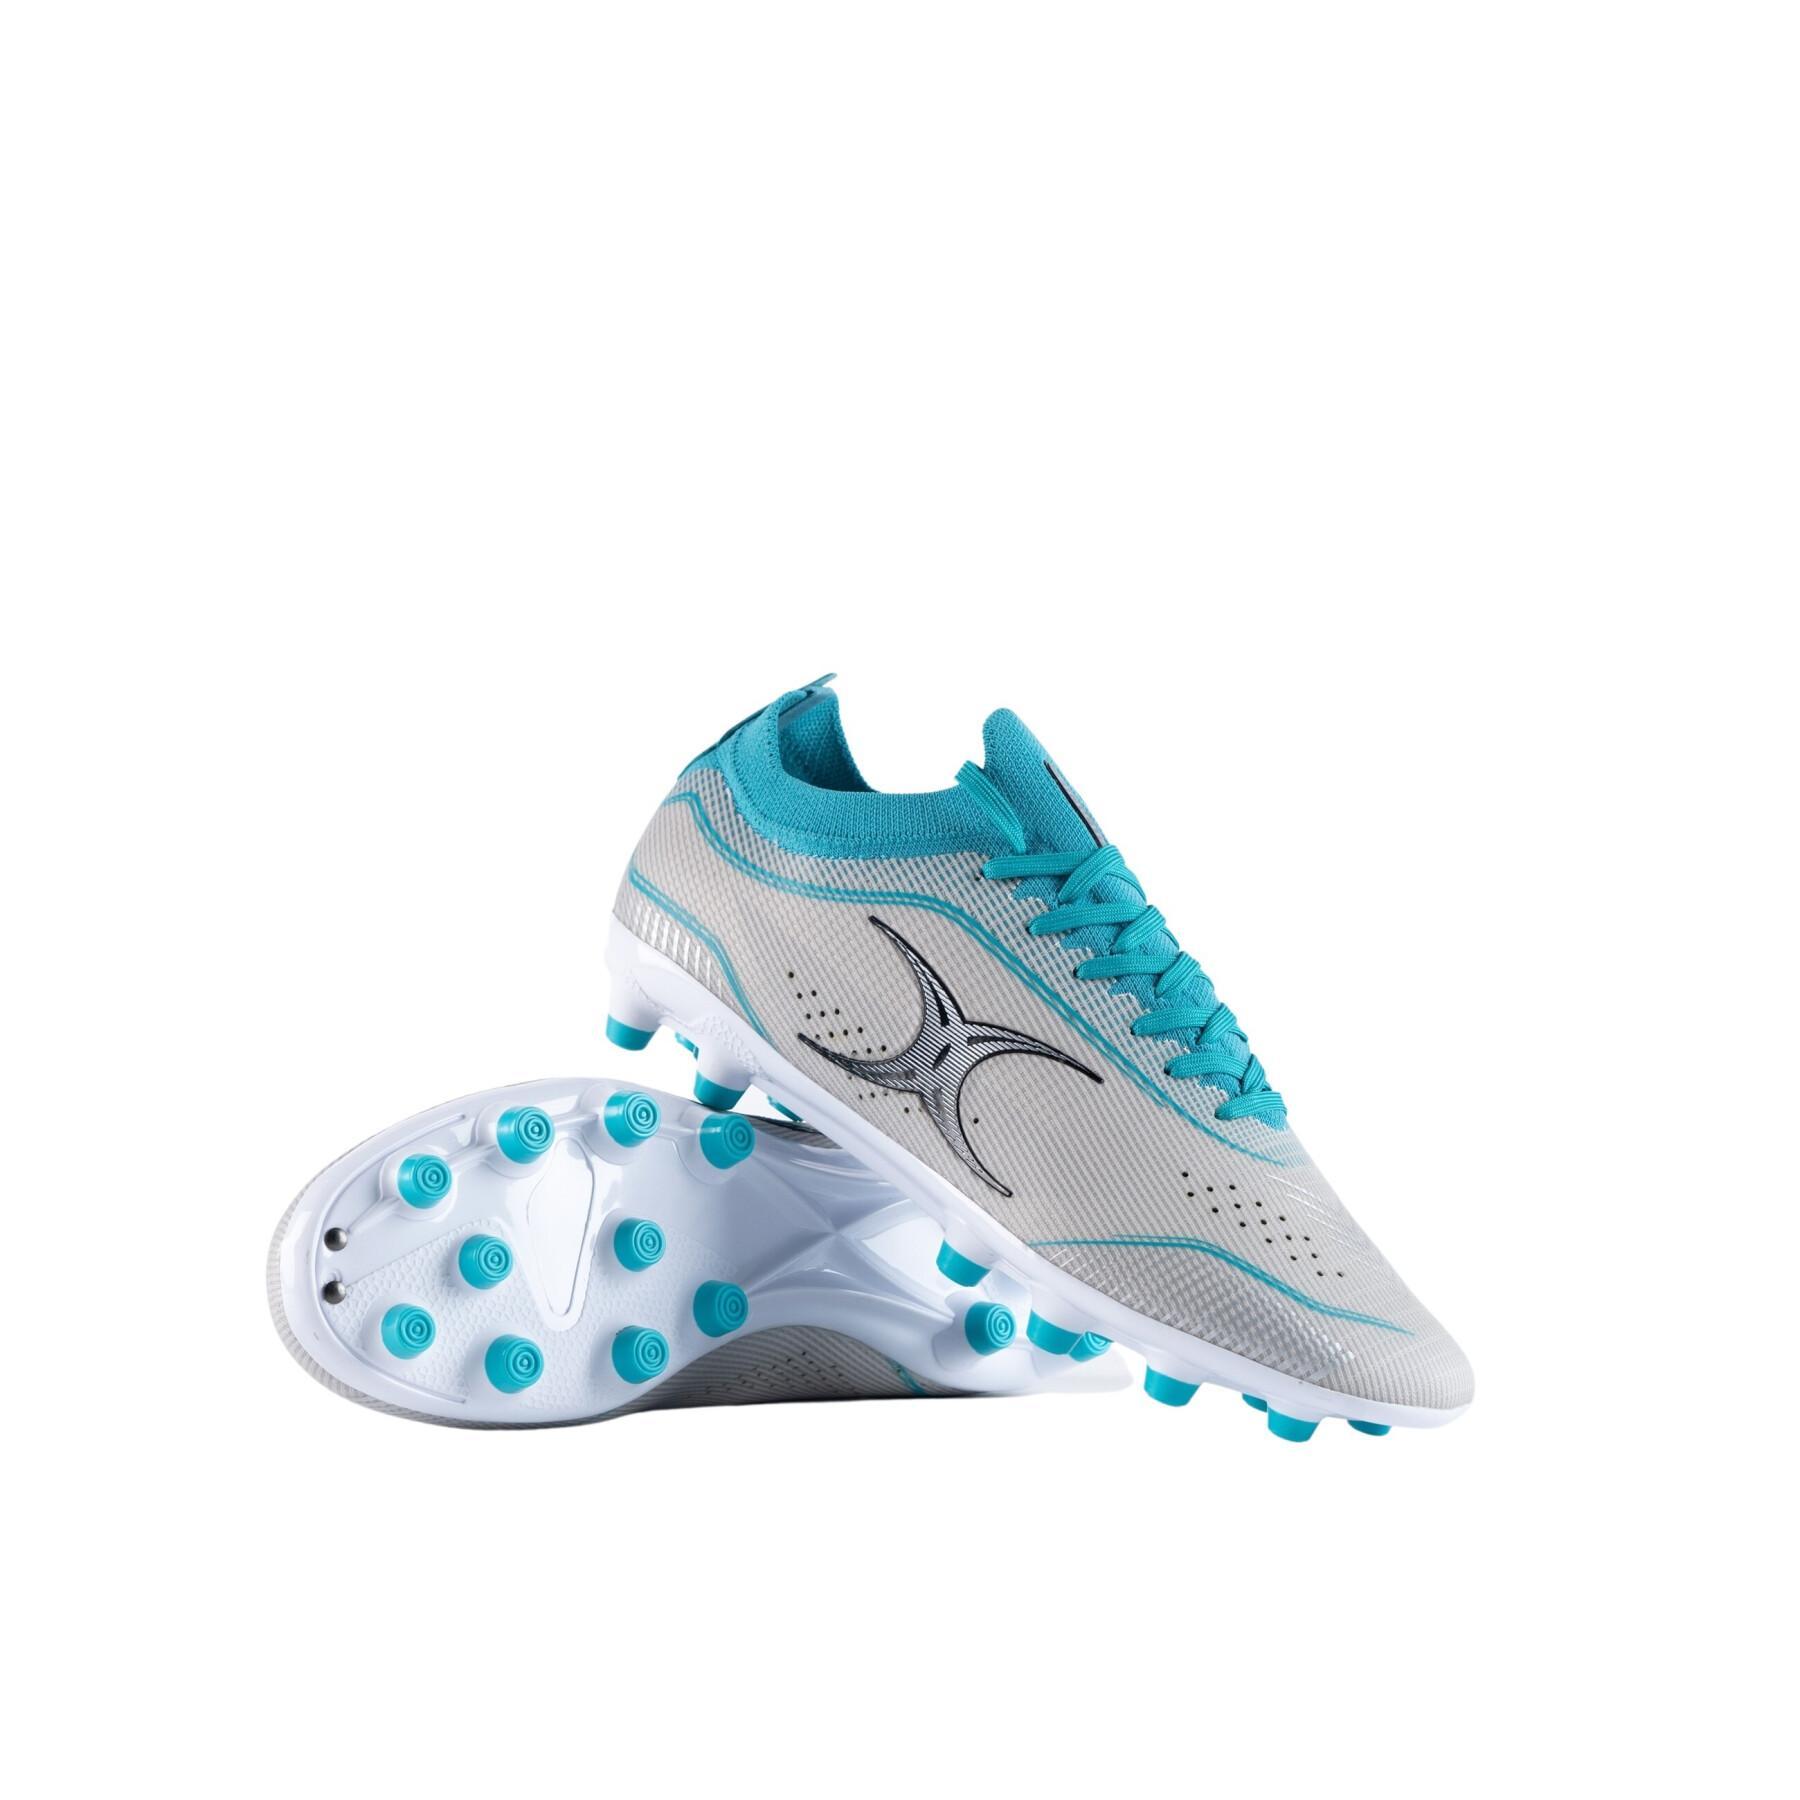 Chaussures de rugby Gilbert Cage Pace Pro MSX